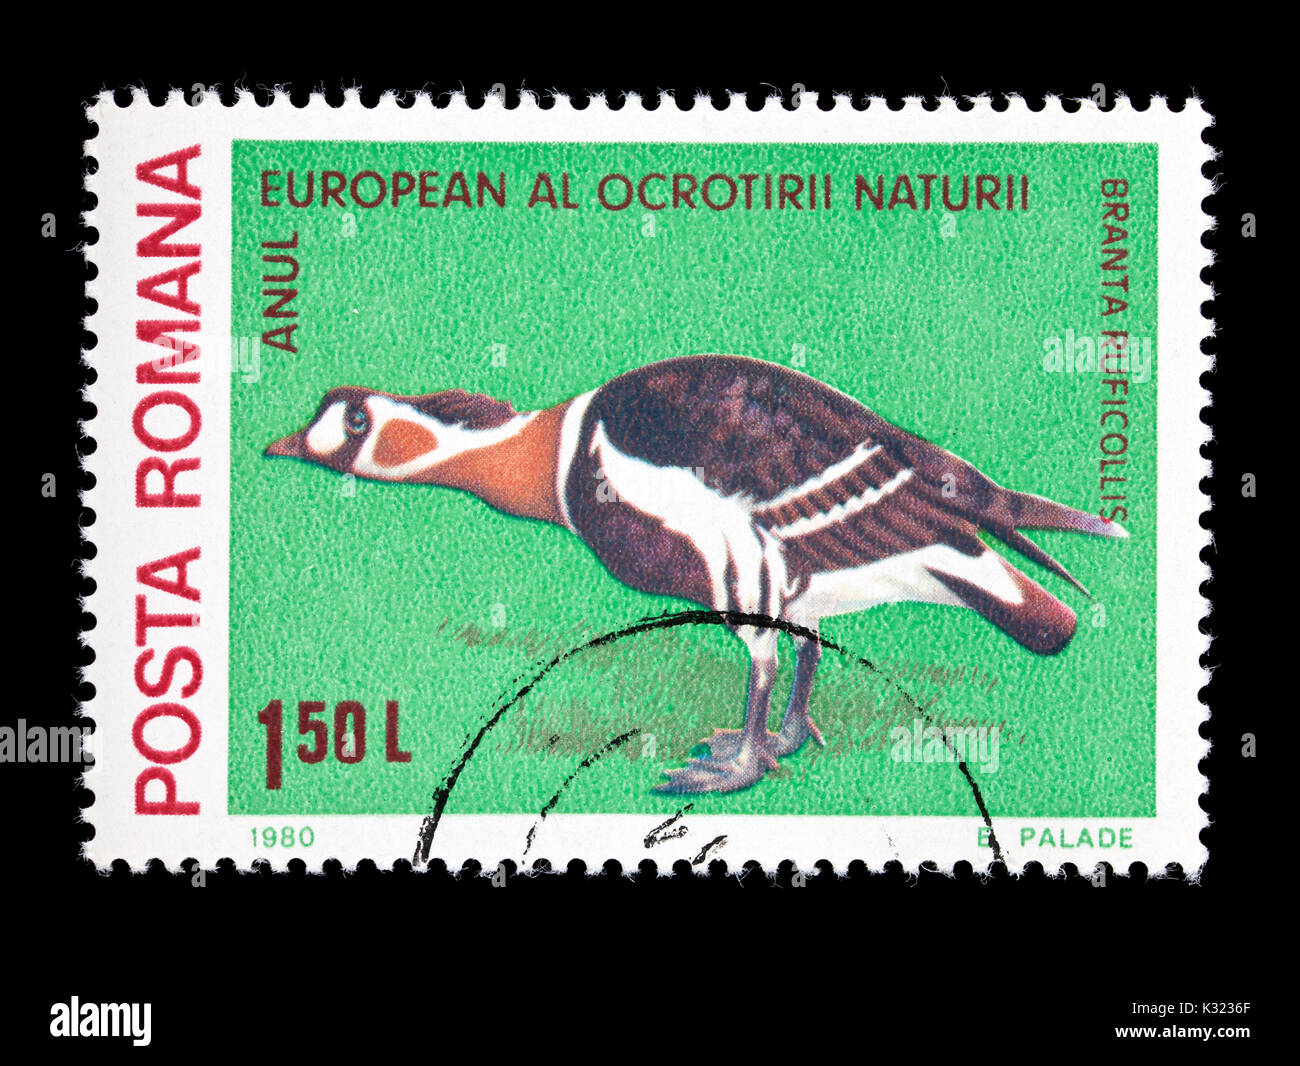 Postage stamp from Romania depicting a red-breasted goose (Branta ruficollis) Stock Photo